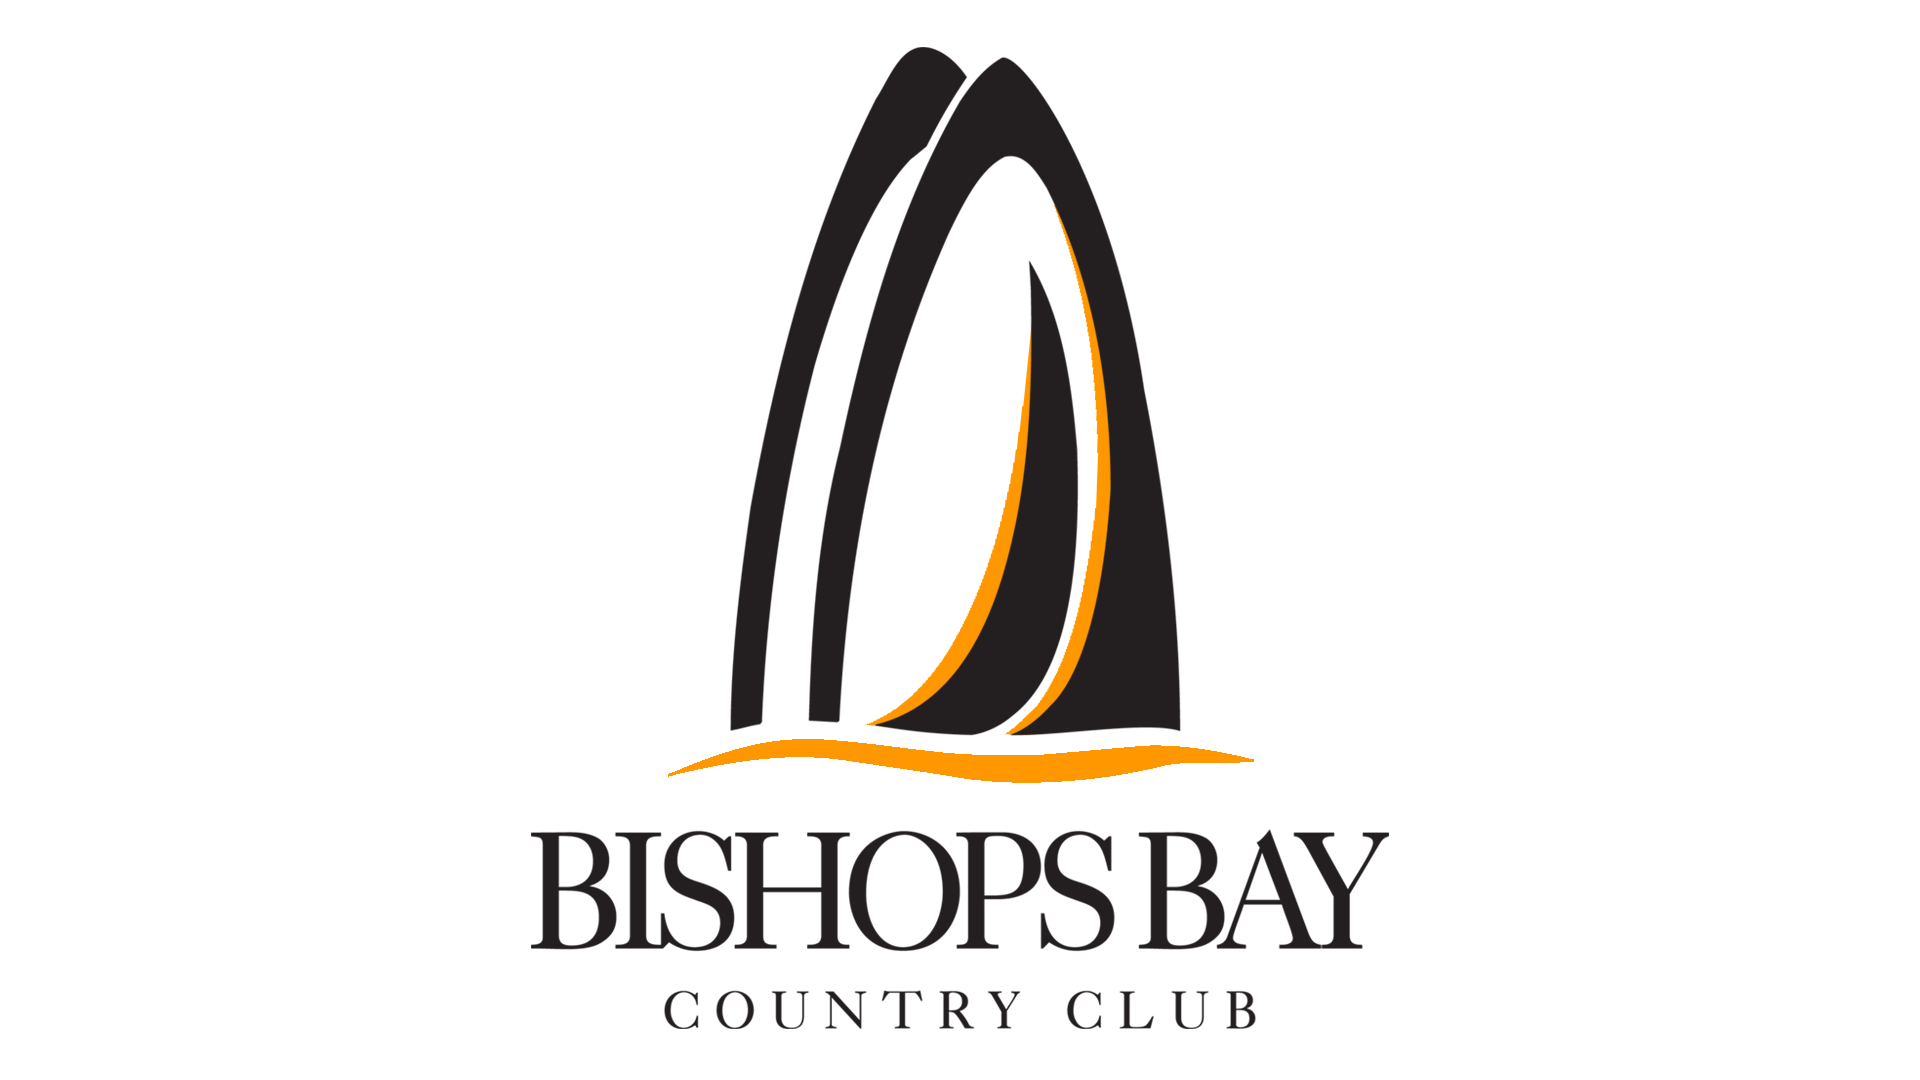 Bishops Bay Country Club